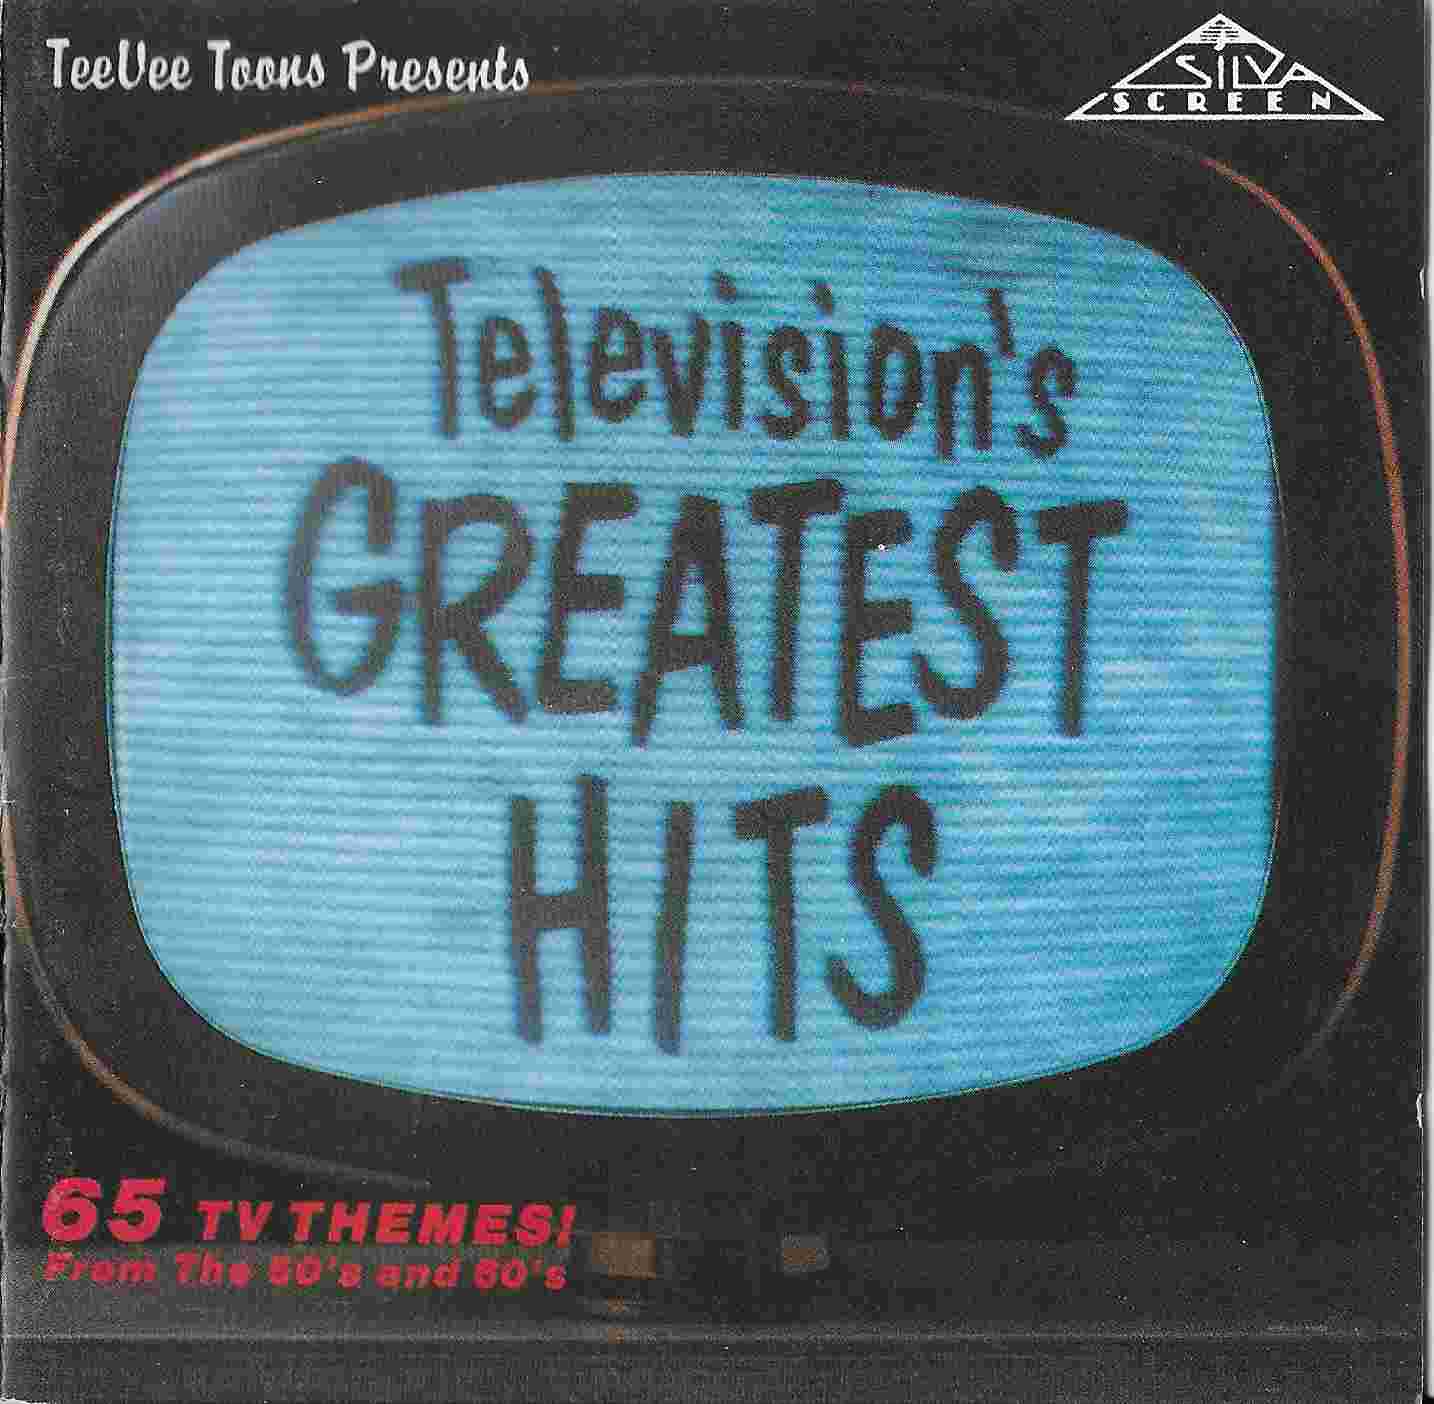 Picture of Television's greatest hits - Volume 1 by artist Various from ITV, Channel 4 and Channel 5 cds library